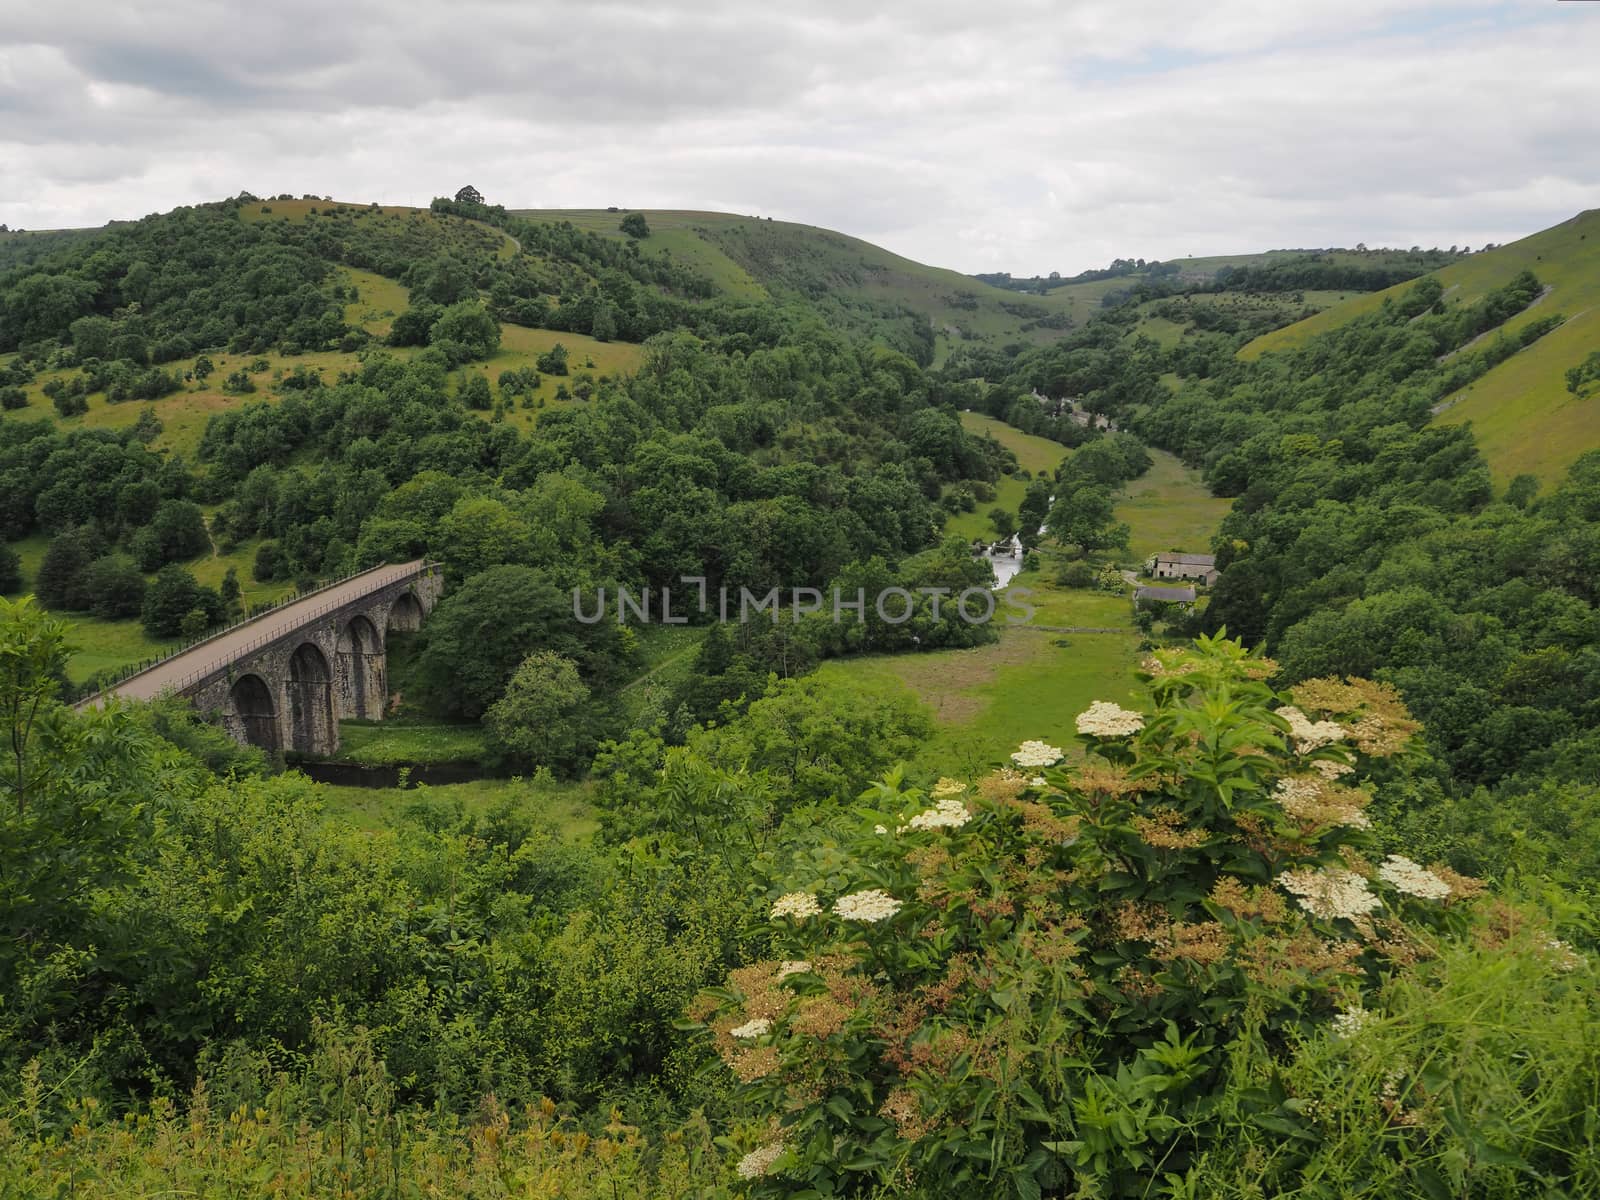 Headstone Viaduct at Monsal Head, part of the Monsal Trail, Peak District by PhilHarland